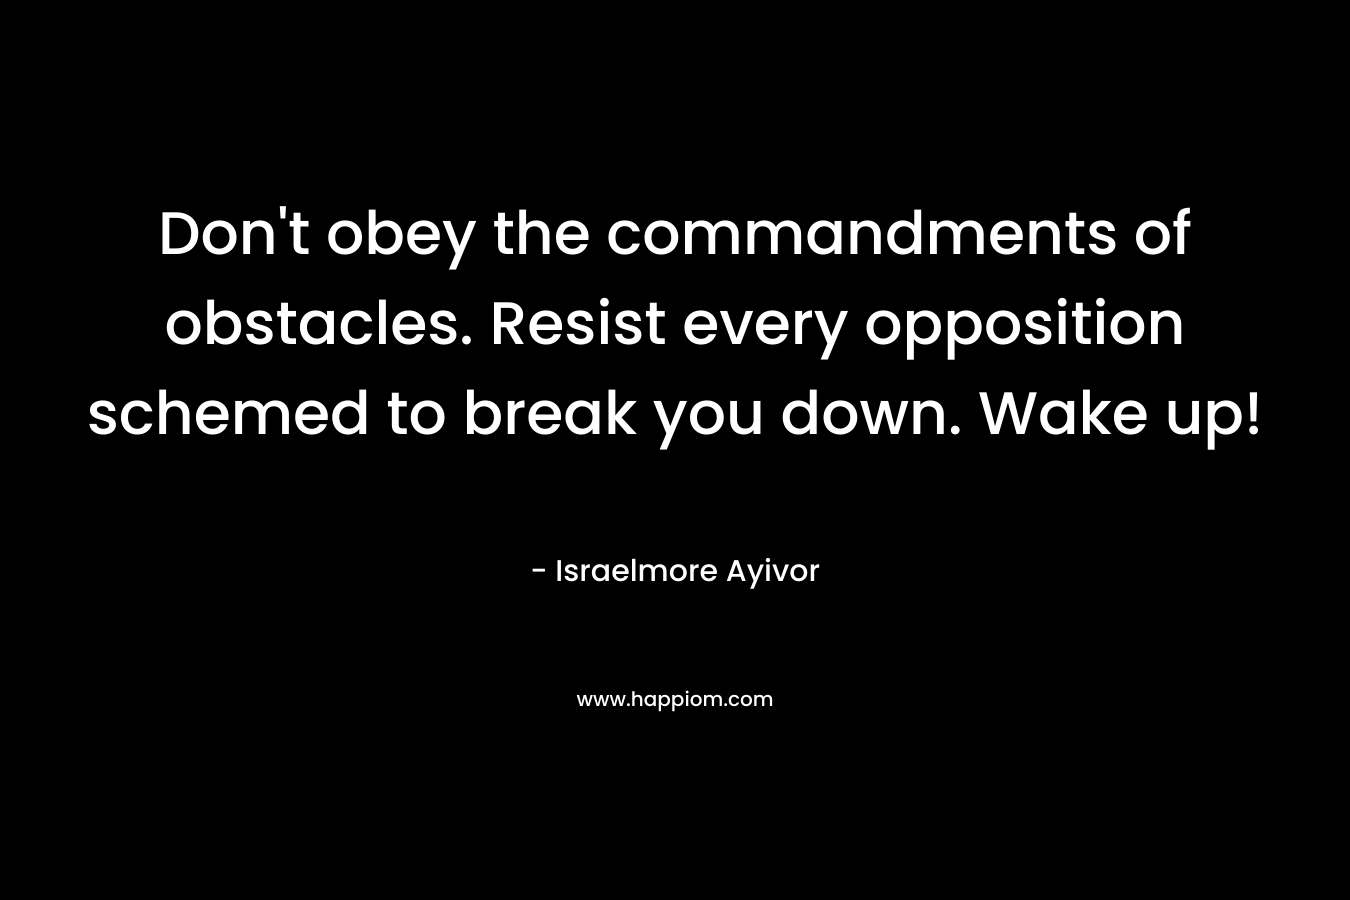 Don't obey the commandments of obstacles. Resist every opposition schemed to break you down. Wake up!